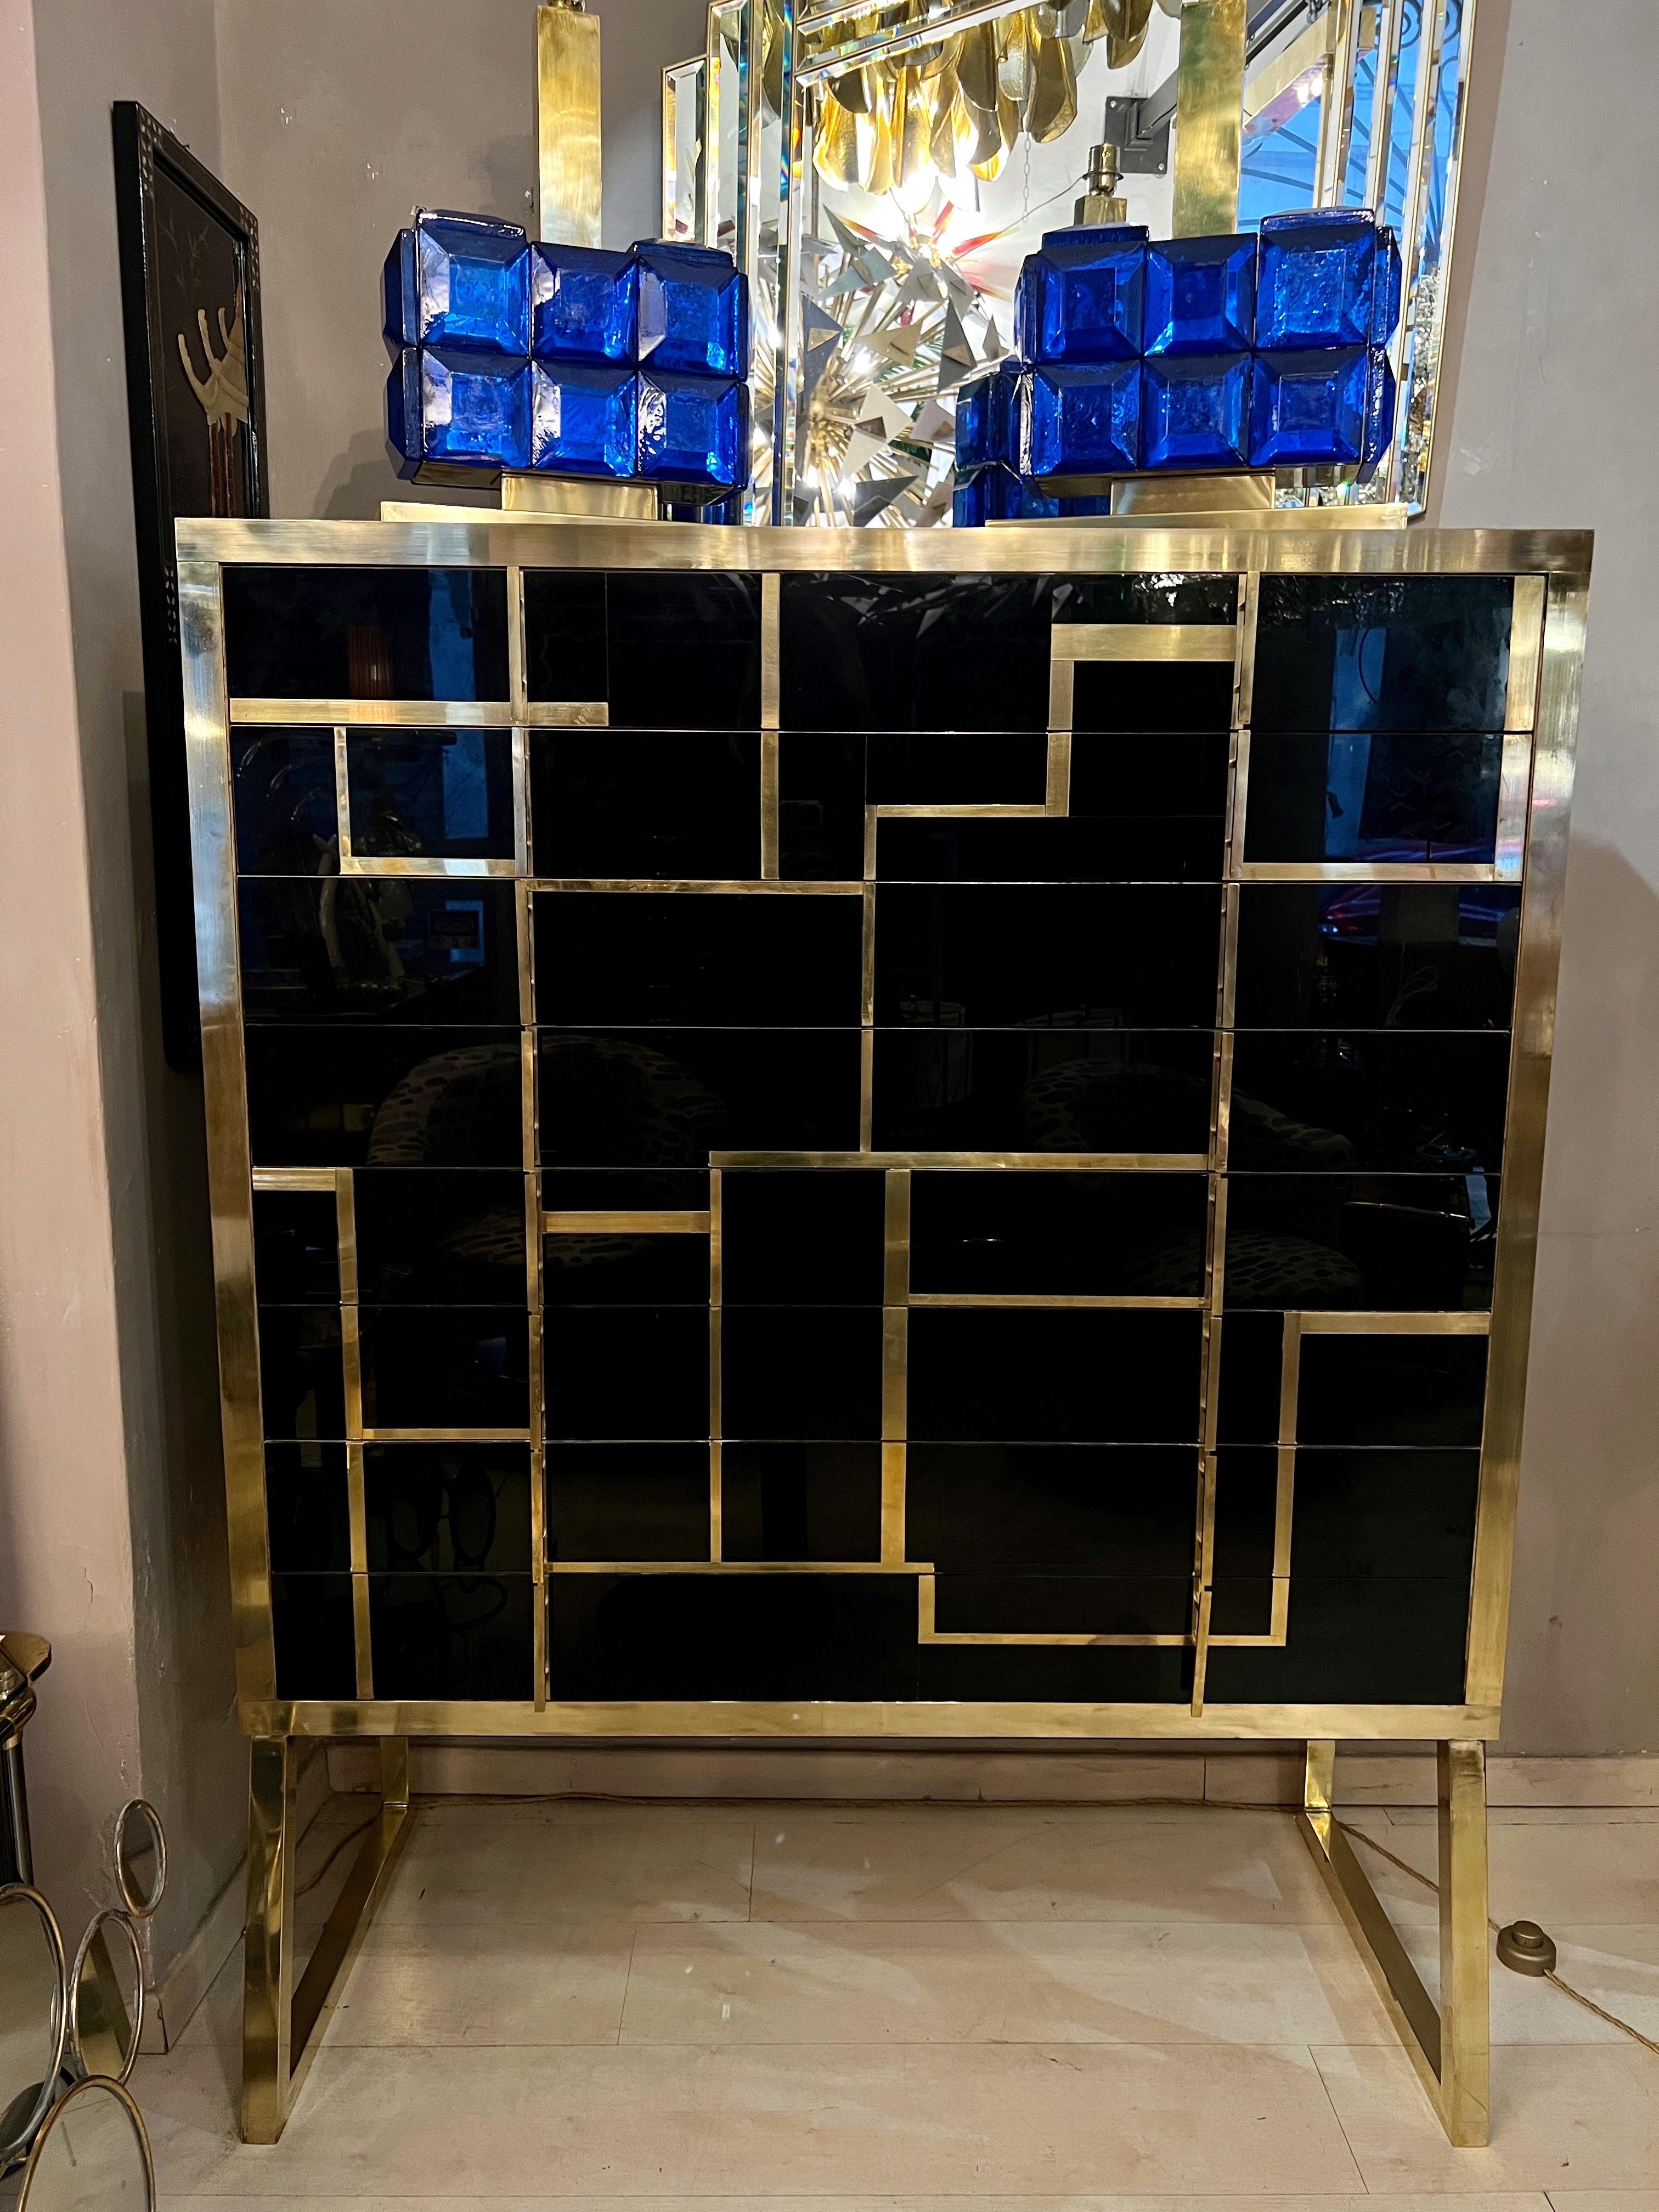 Black opaline glass high chest of drawers with brass and gold opaline glass inserts.
The chest has brass handles and legs and 8 drawers.